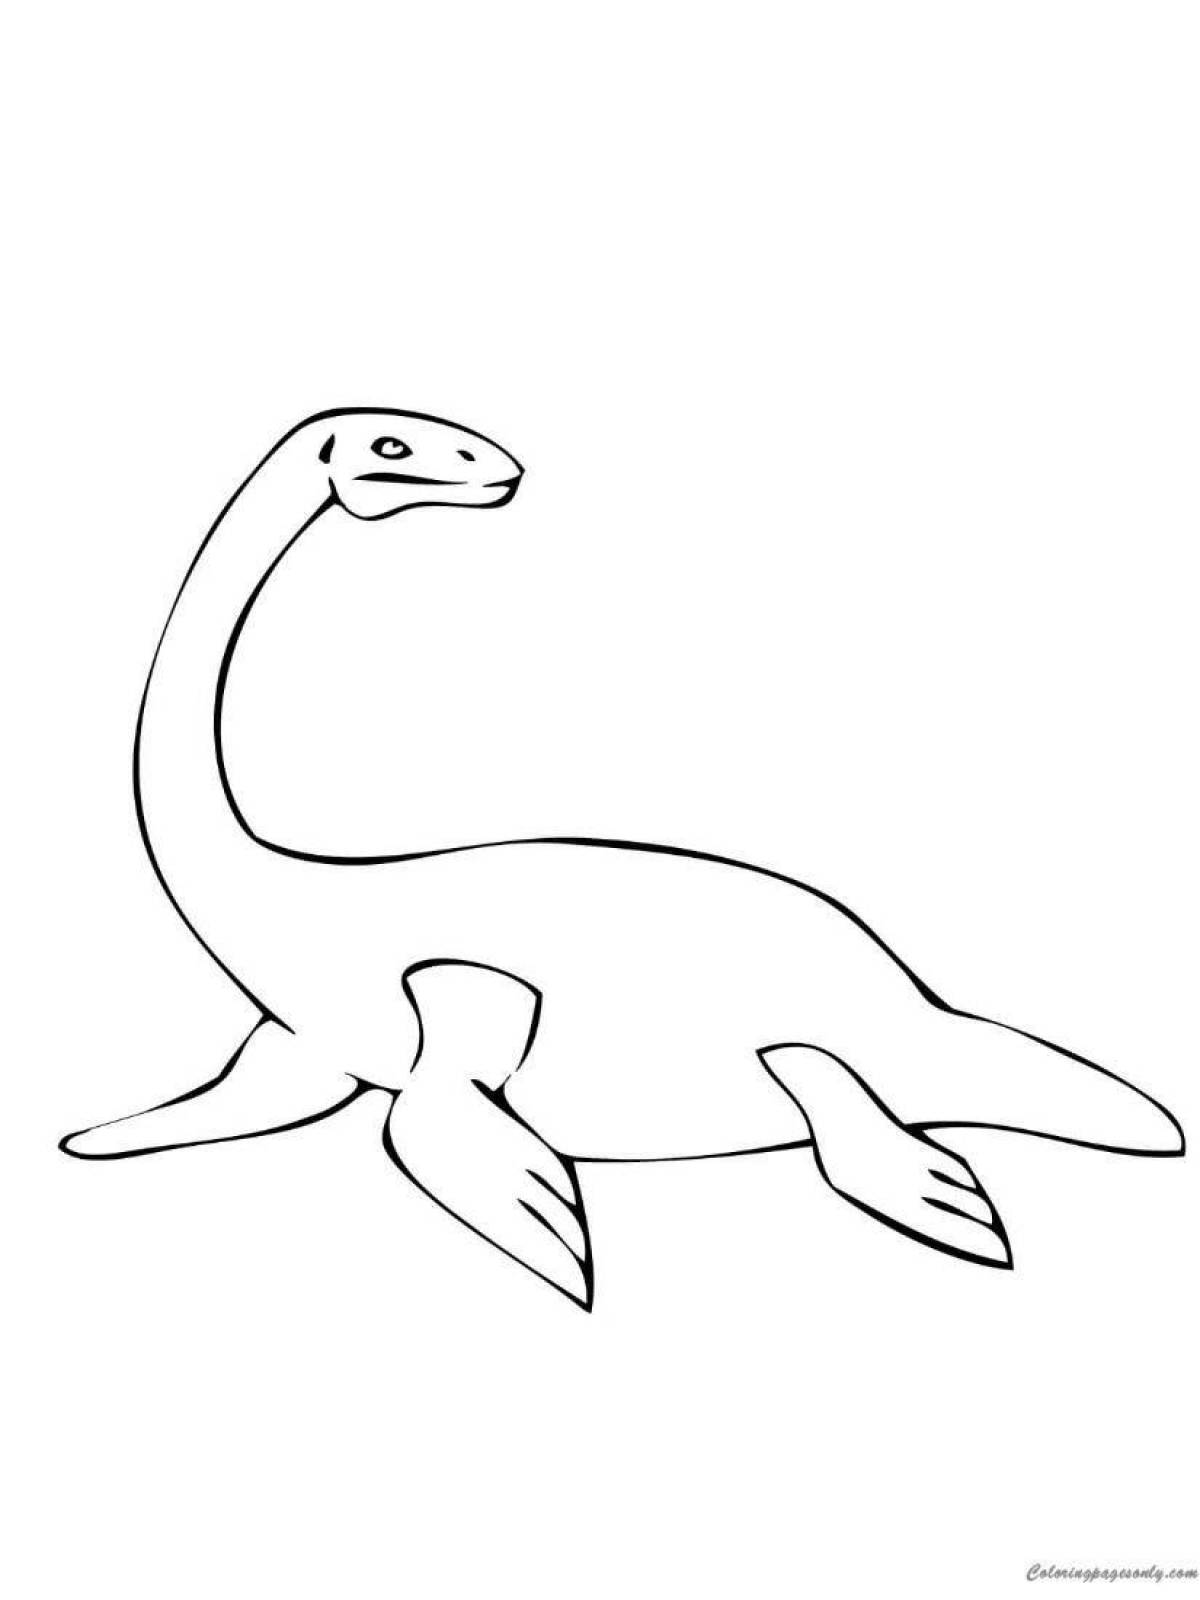 Lochness monster shining coloring page